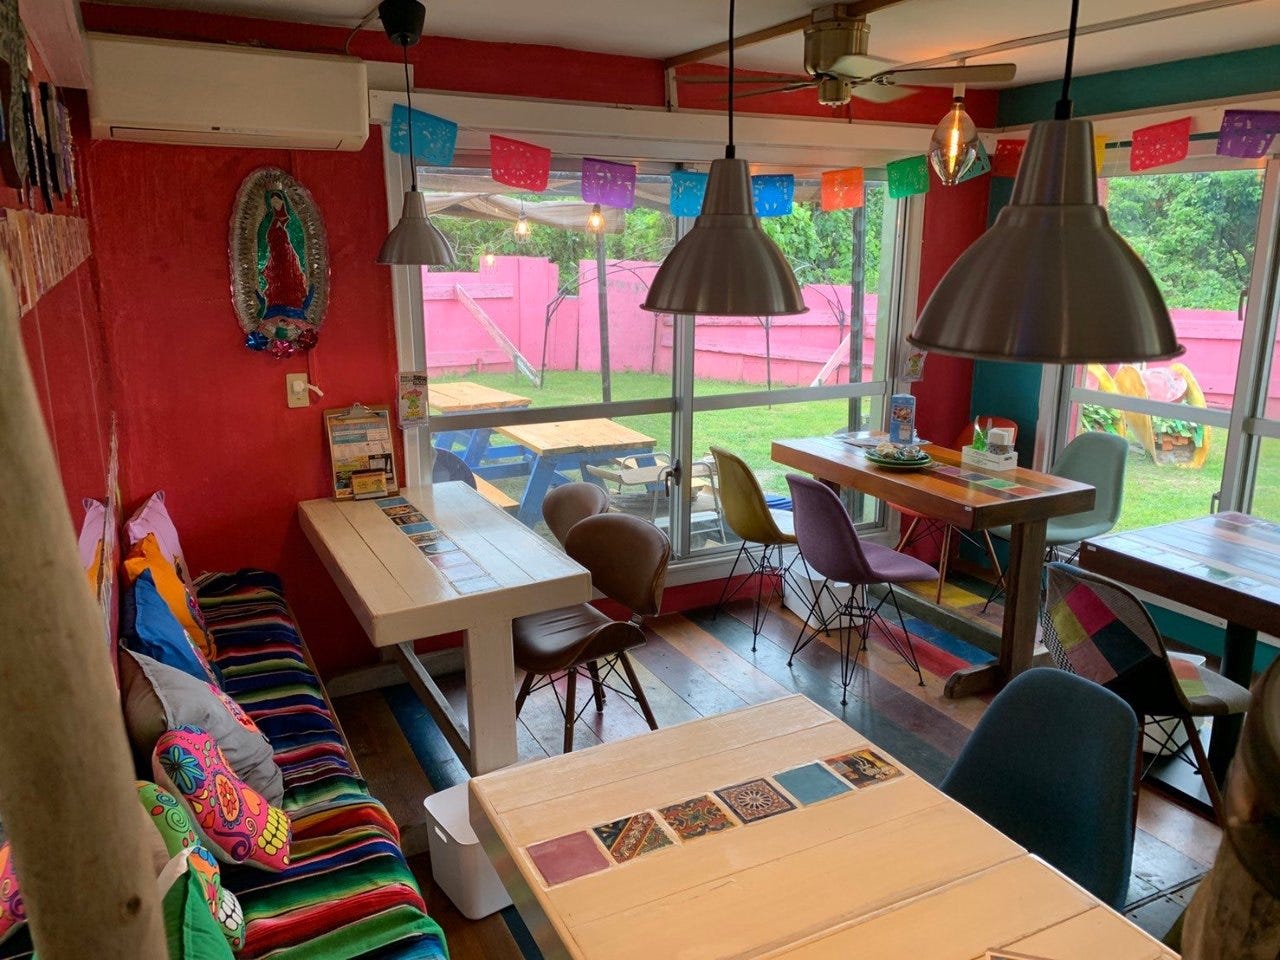 MEXICAN DINER マリソル